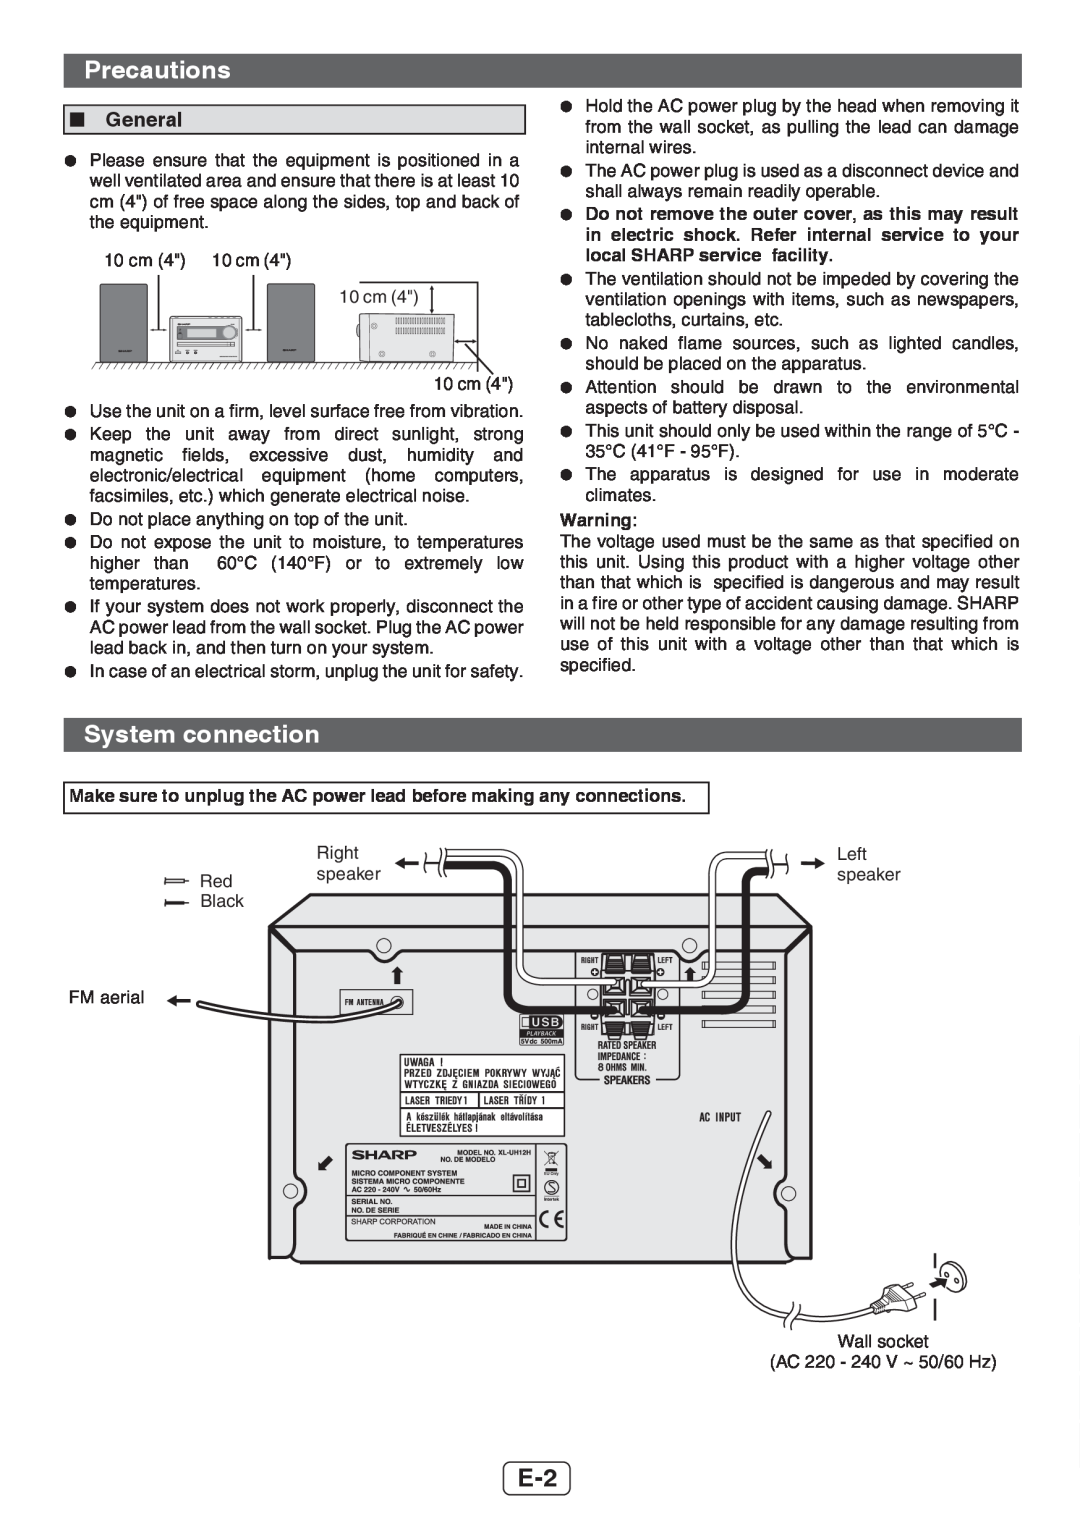 Sharp XL-UH12H operation manual Precautions, System connection, General 